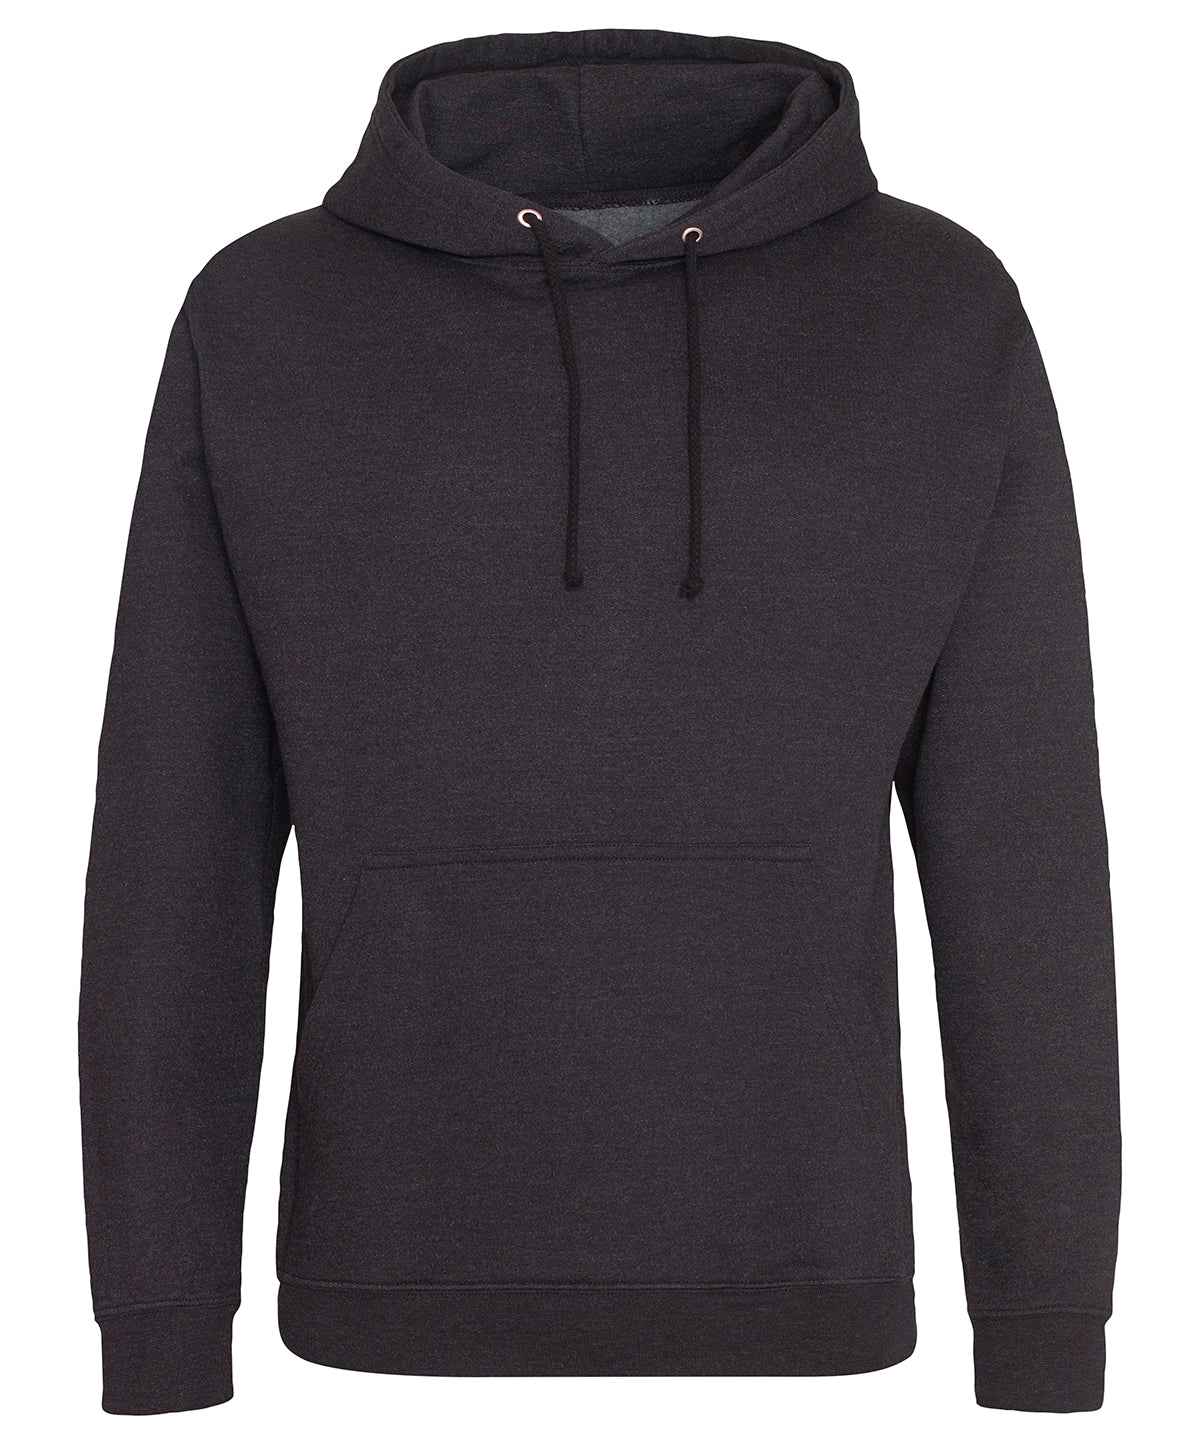 College Hoodie - The Essential Colours